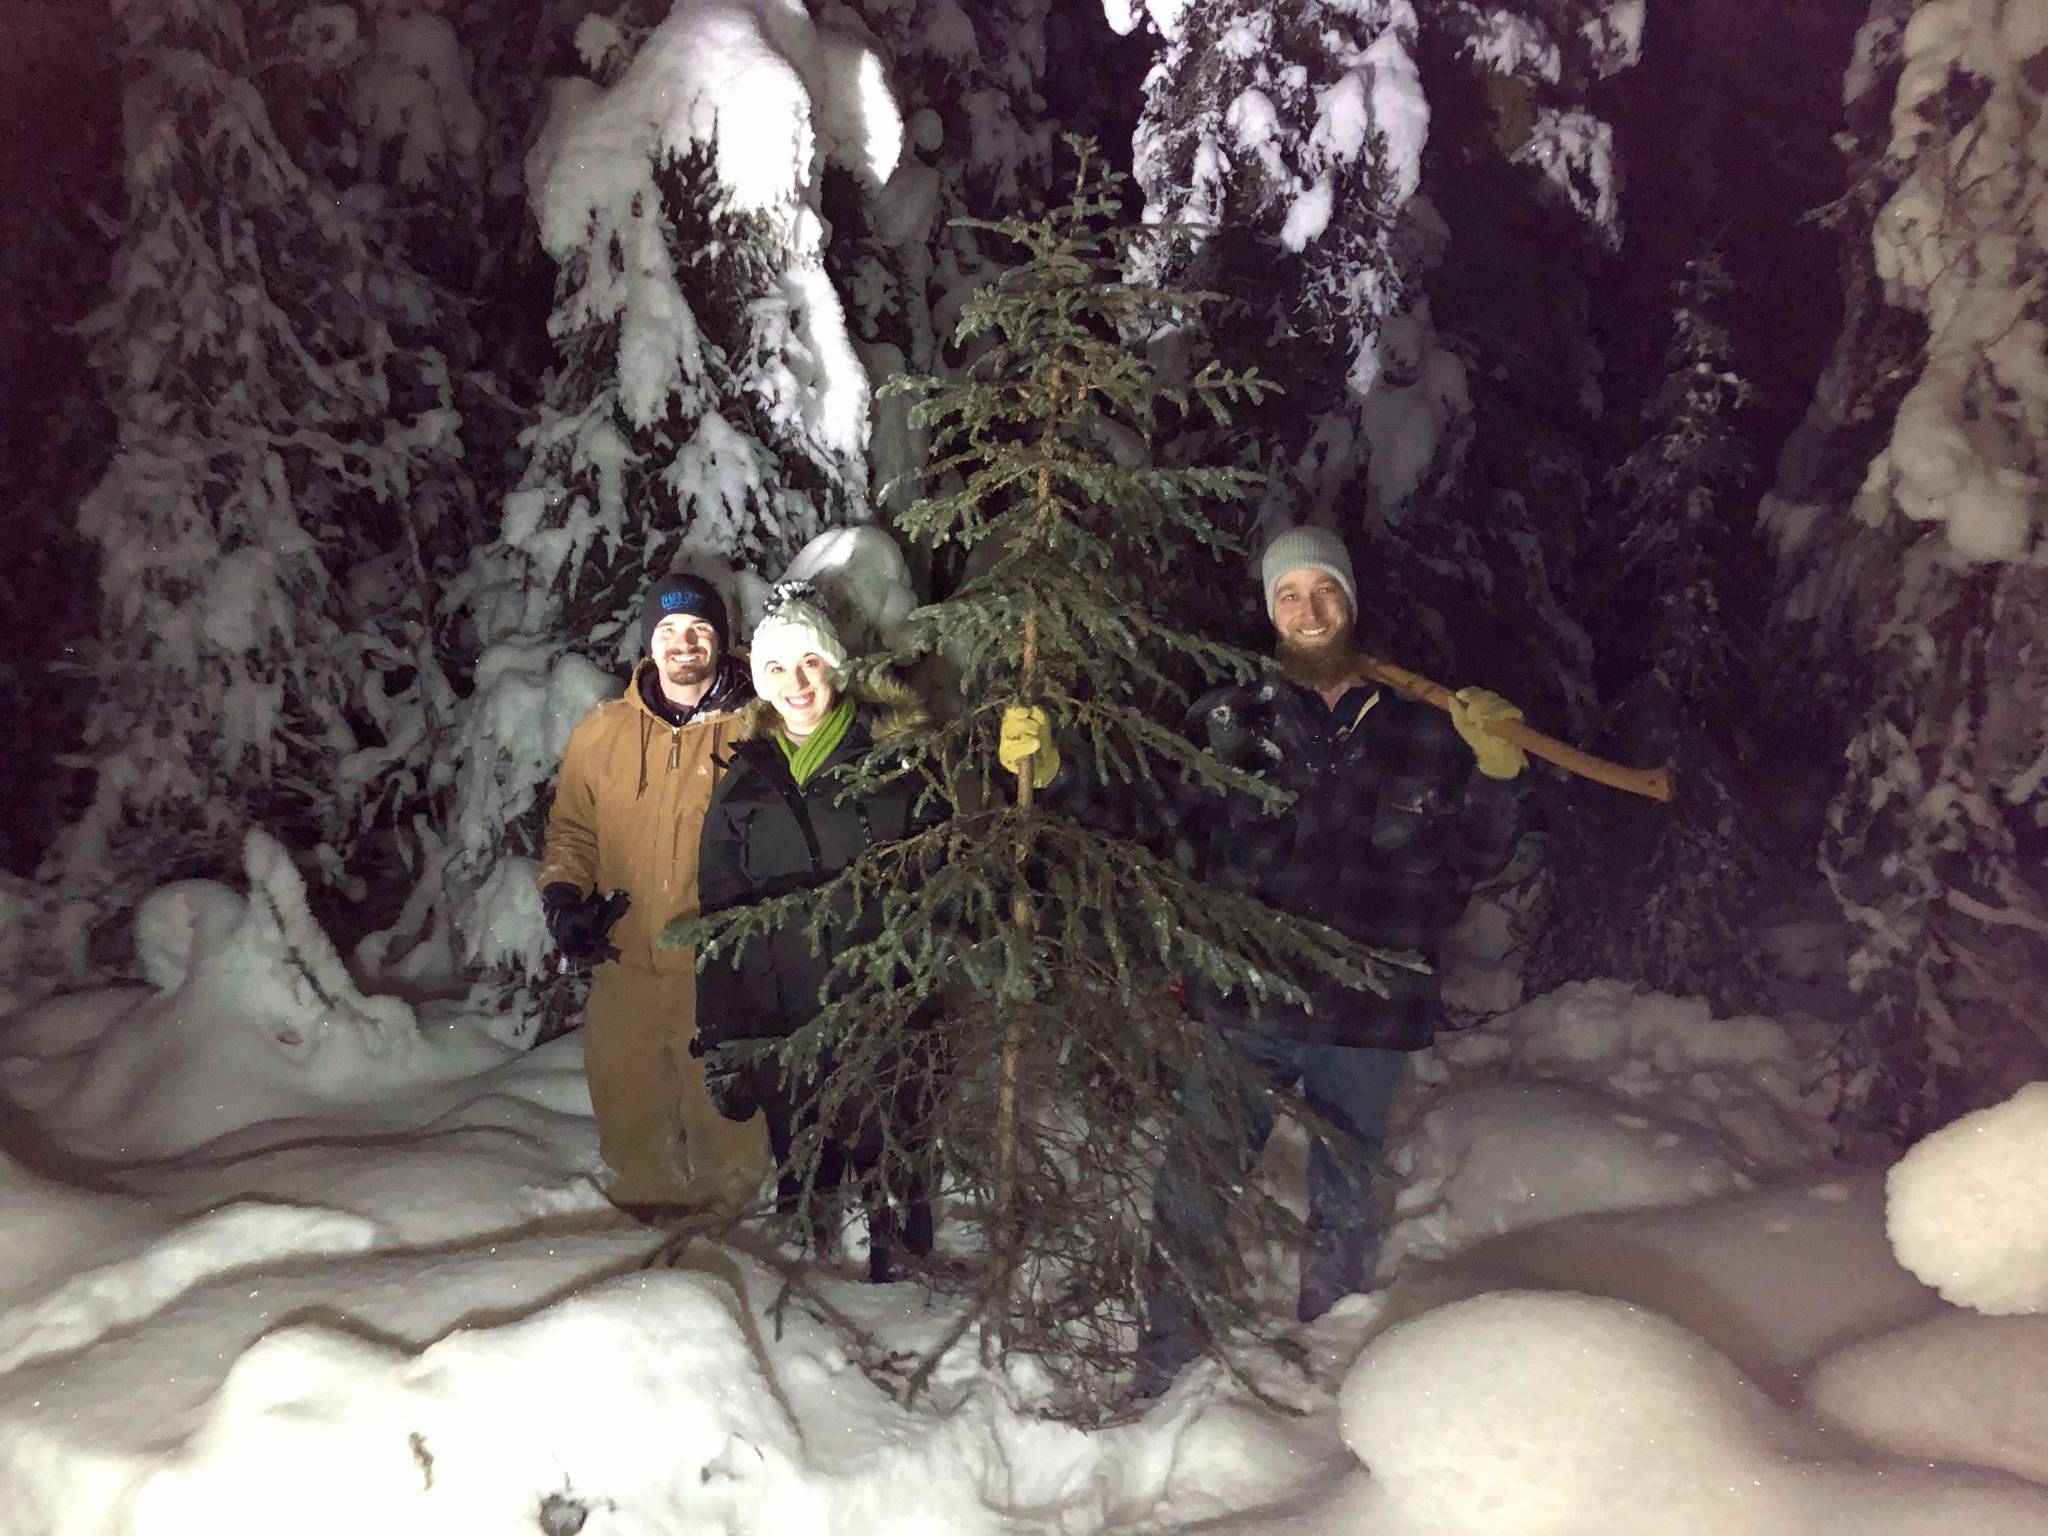 Ben Weagraff, Olivia Orth and Brian Mazurek stand next to a freshly cut black spruce off Funny River Road in Soldotna, Alaska on Dec. 8, 2019. (Photo by Victoria Peterson)